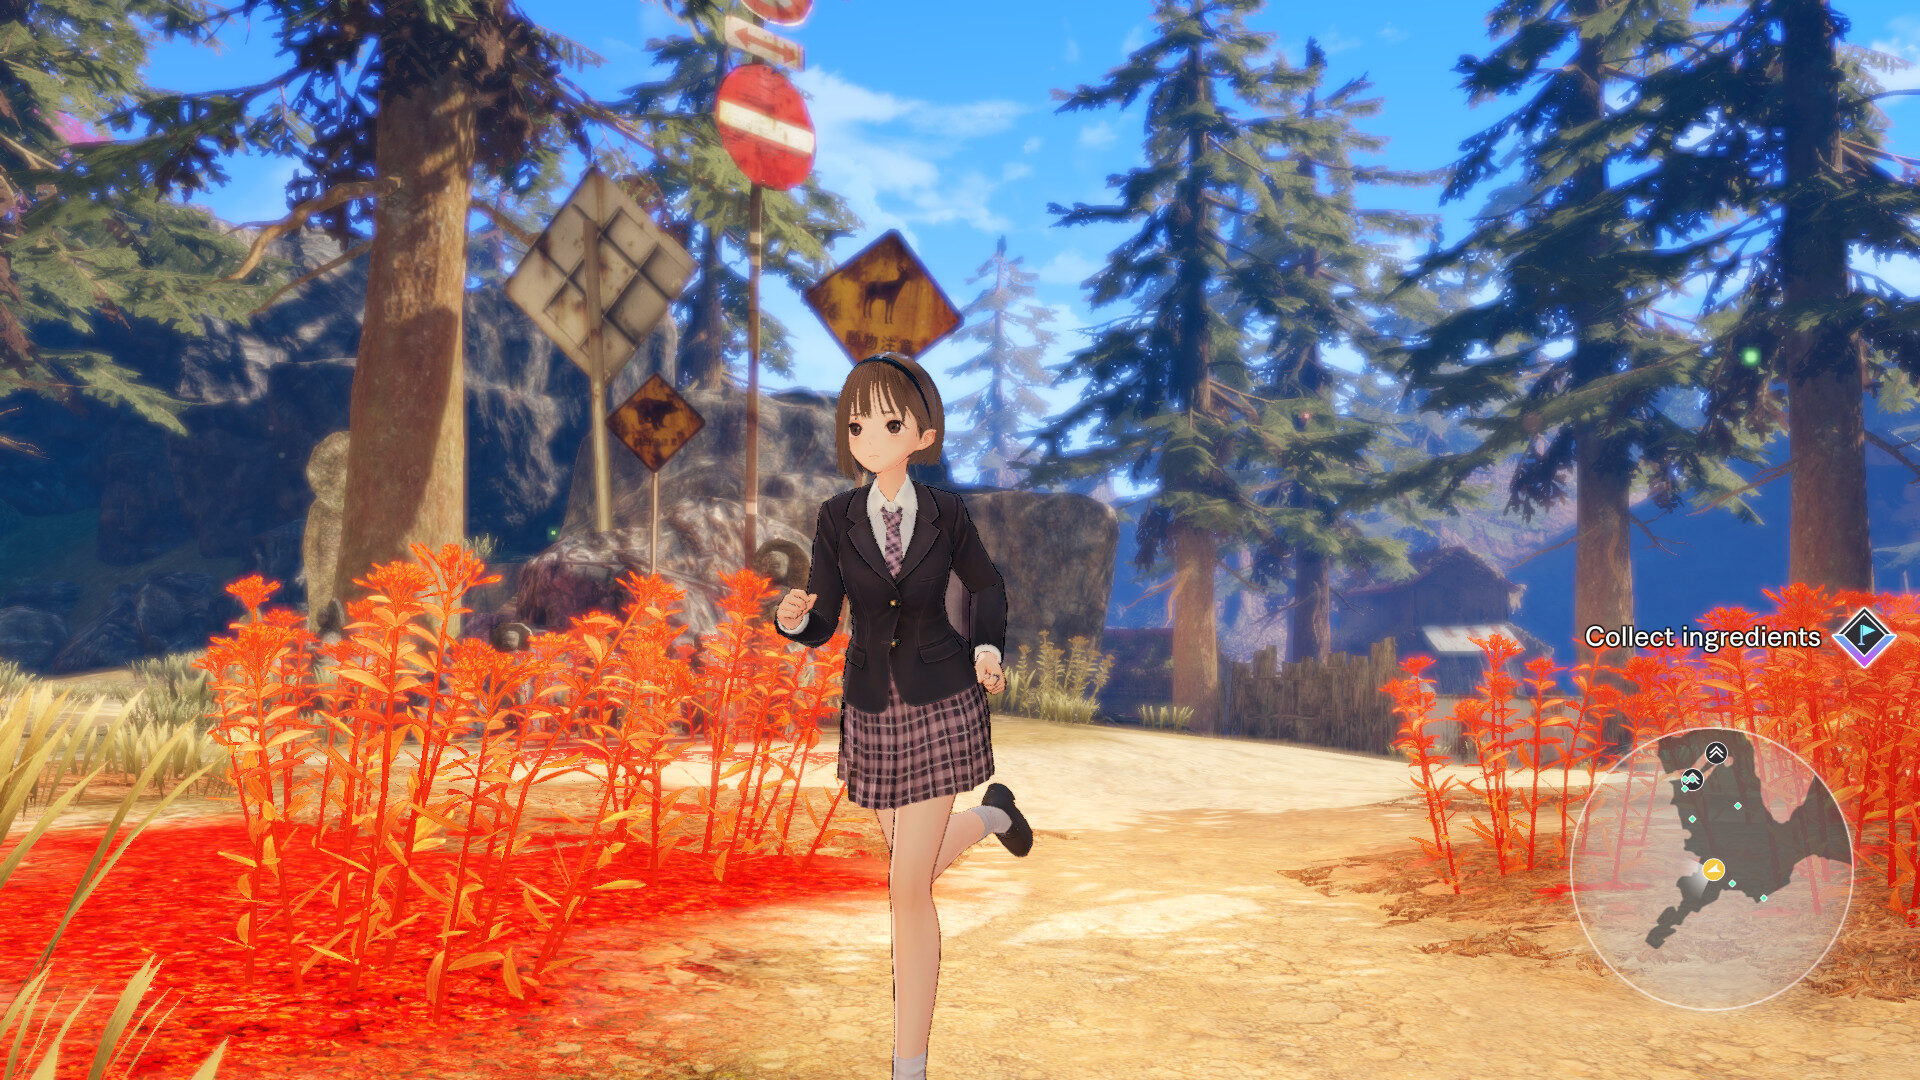 Blue Reflection: Second Light review